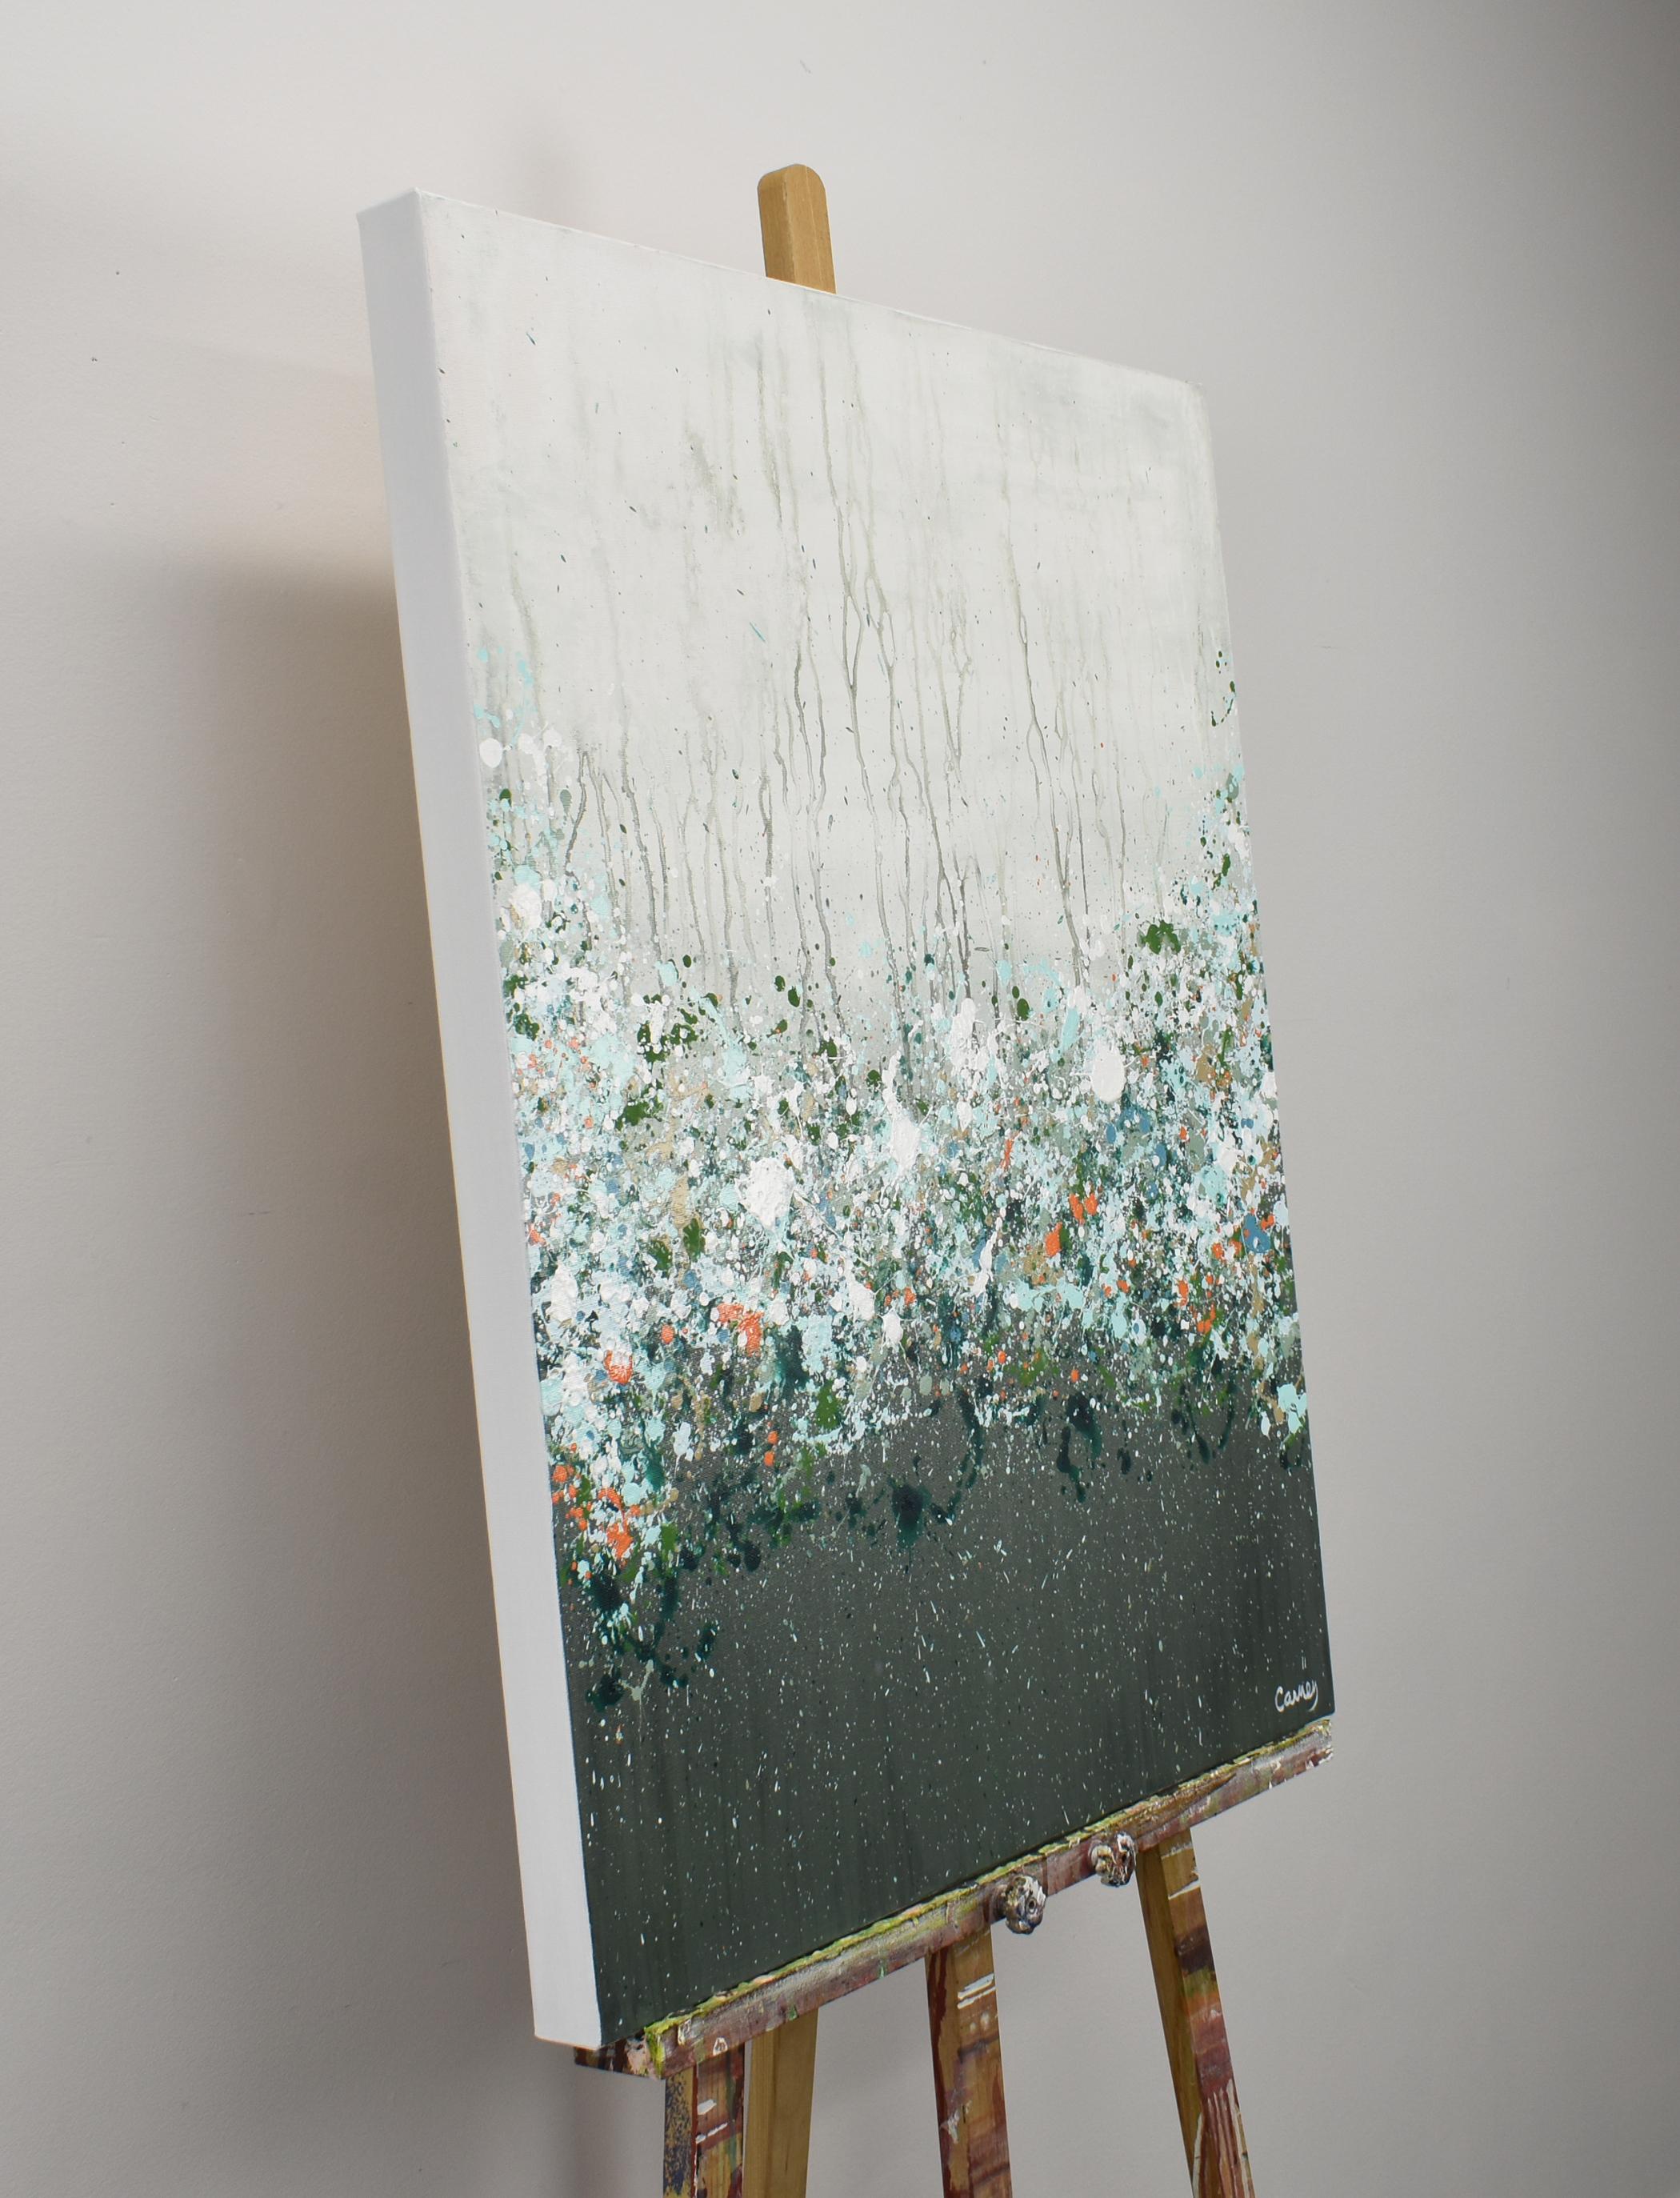 <p>Artist Comments<br /> Using drips, splatters, and expressionist brushwork, artist Lisa Carney offers an abstract view of wildflowers in the countryside. Soft drips of faint gray emulate young trees behind a veil of mist. Ethereal shades of green